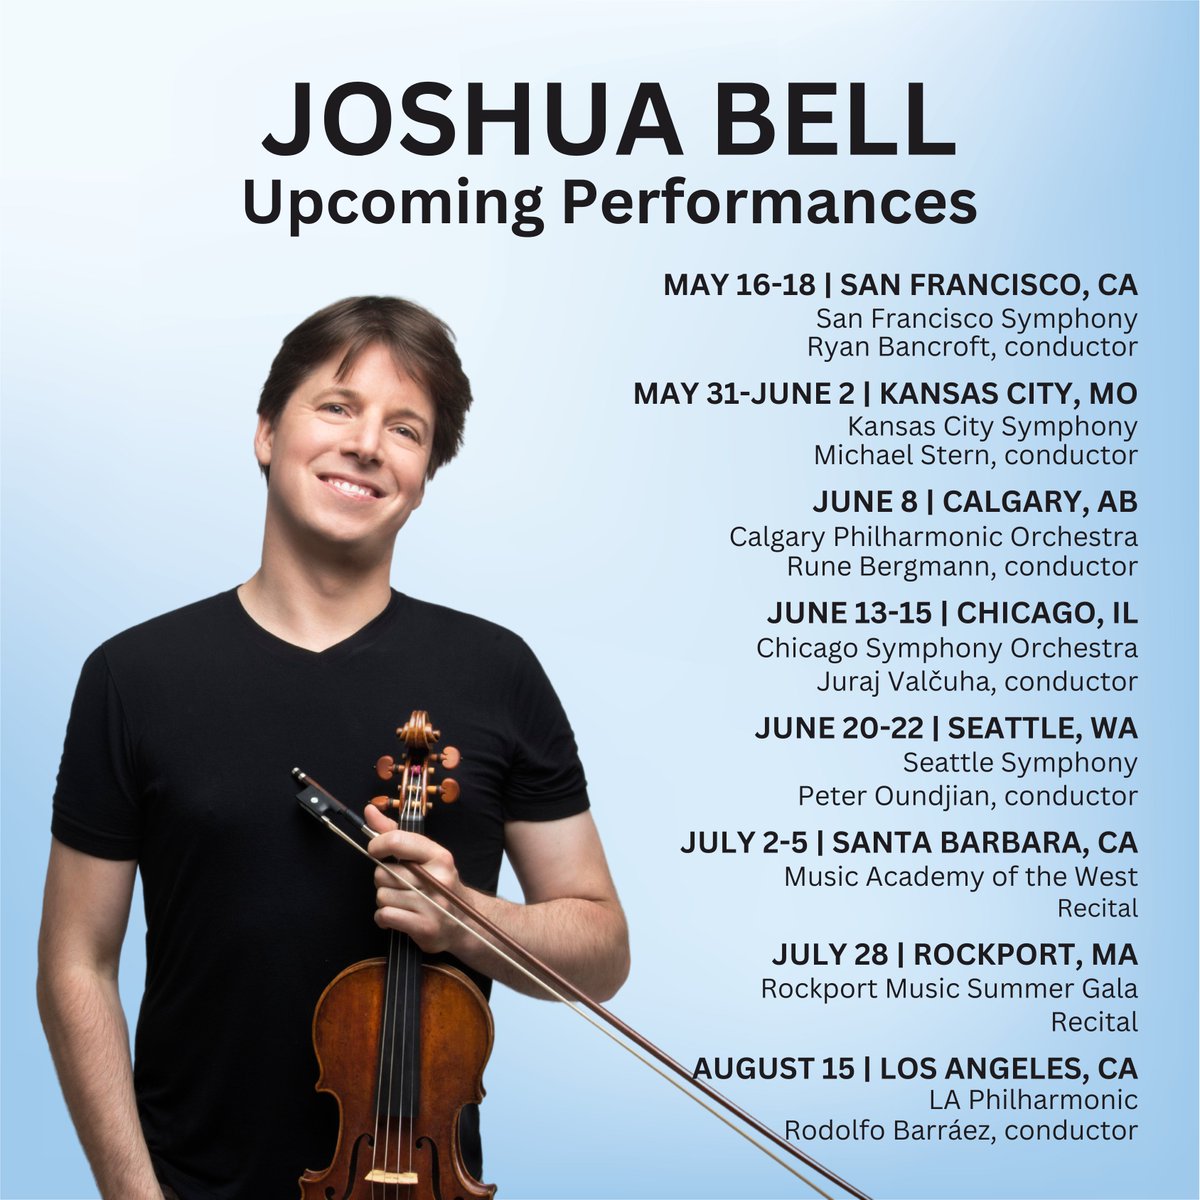 🎻 @JoshuaBellMusic performs from coast to coast this summer! He joins 6 orchestras as soloist and plays recitals in California and Massachusetts.

May 16-18 : San Francisco | @SFSymphony
May 31- June 2: Kansas City | @KCSymphony
June 8: Calgary | @CalgaryPhil
June 13-15: Chicago